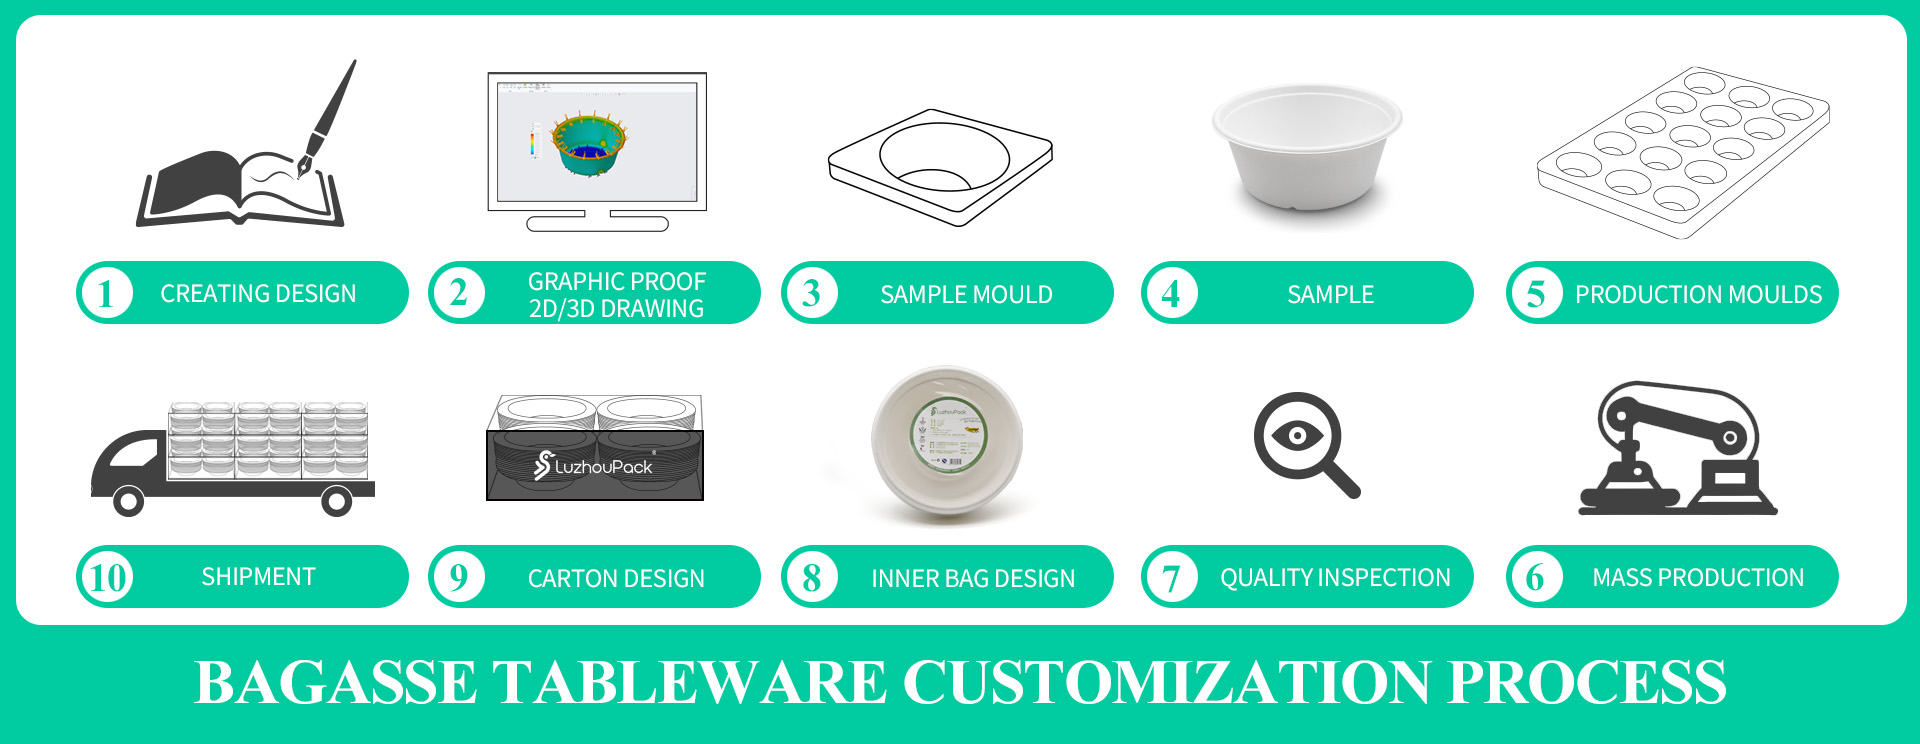 We have full-rounded standardized customization process to efficiently meet the customized needs of our customers.